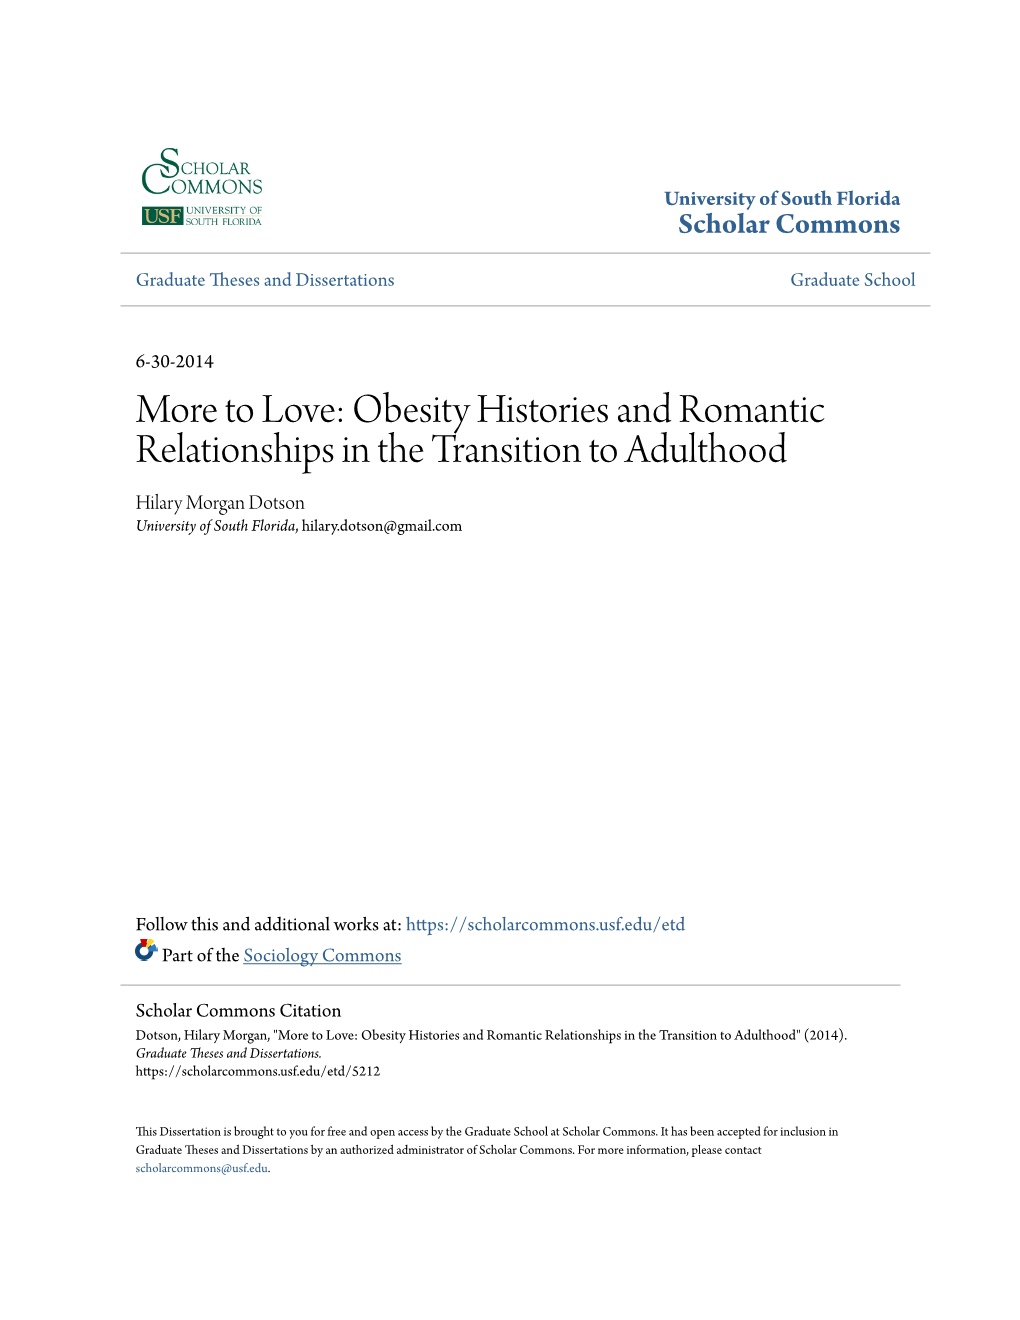 More to Love: Obesity Histories and Romantic Relationships in the Transition to Adulthood Hilary Morgan Dotson University of South Florida, Hilary.Dotson@Gmail.Com